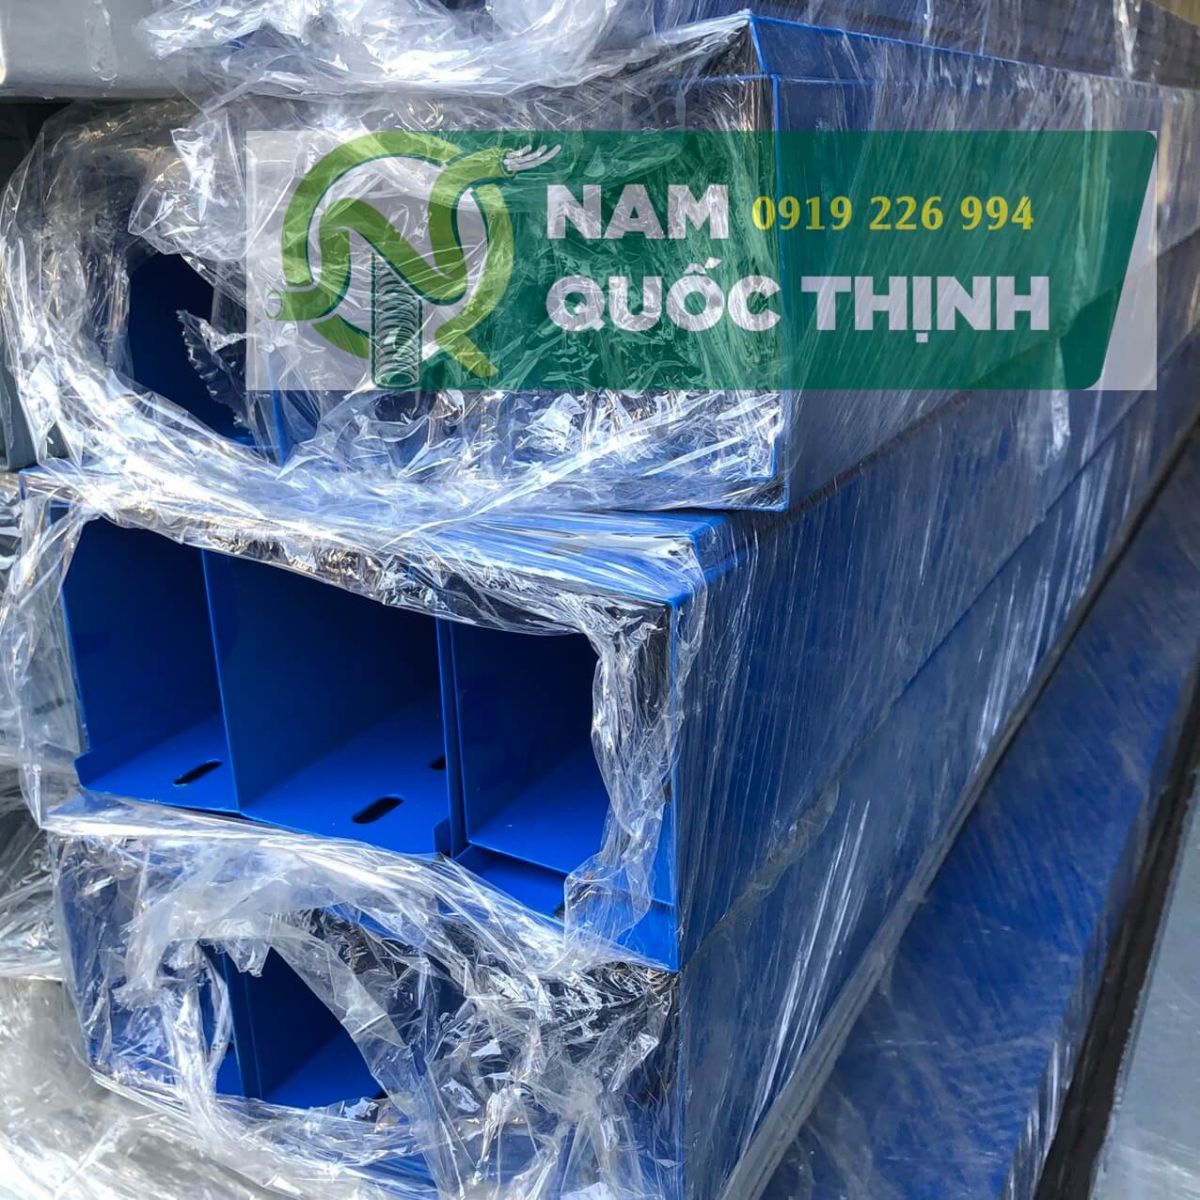 cable trunking son tinh dien 100x75 1 ly xanh duong